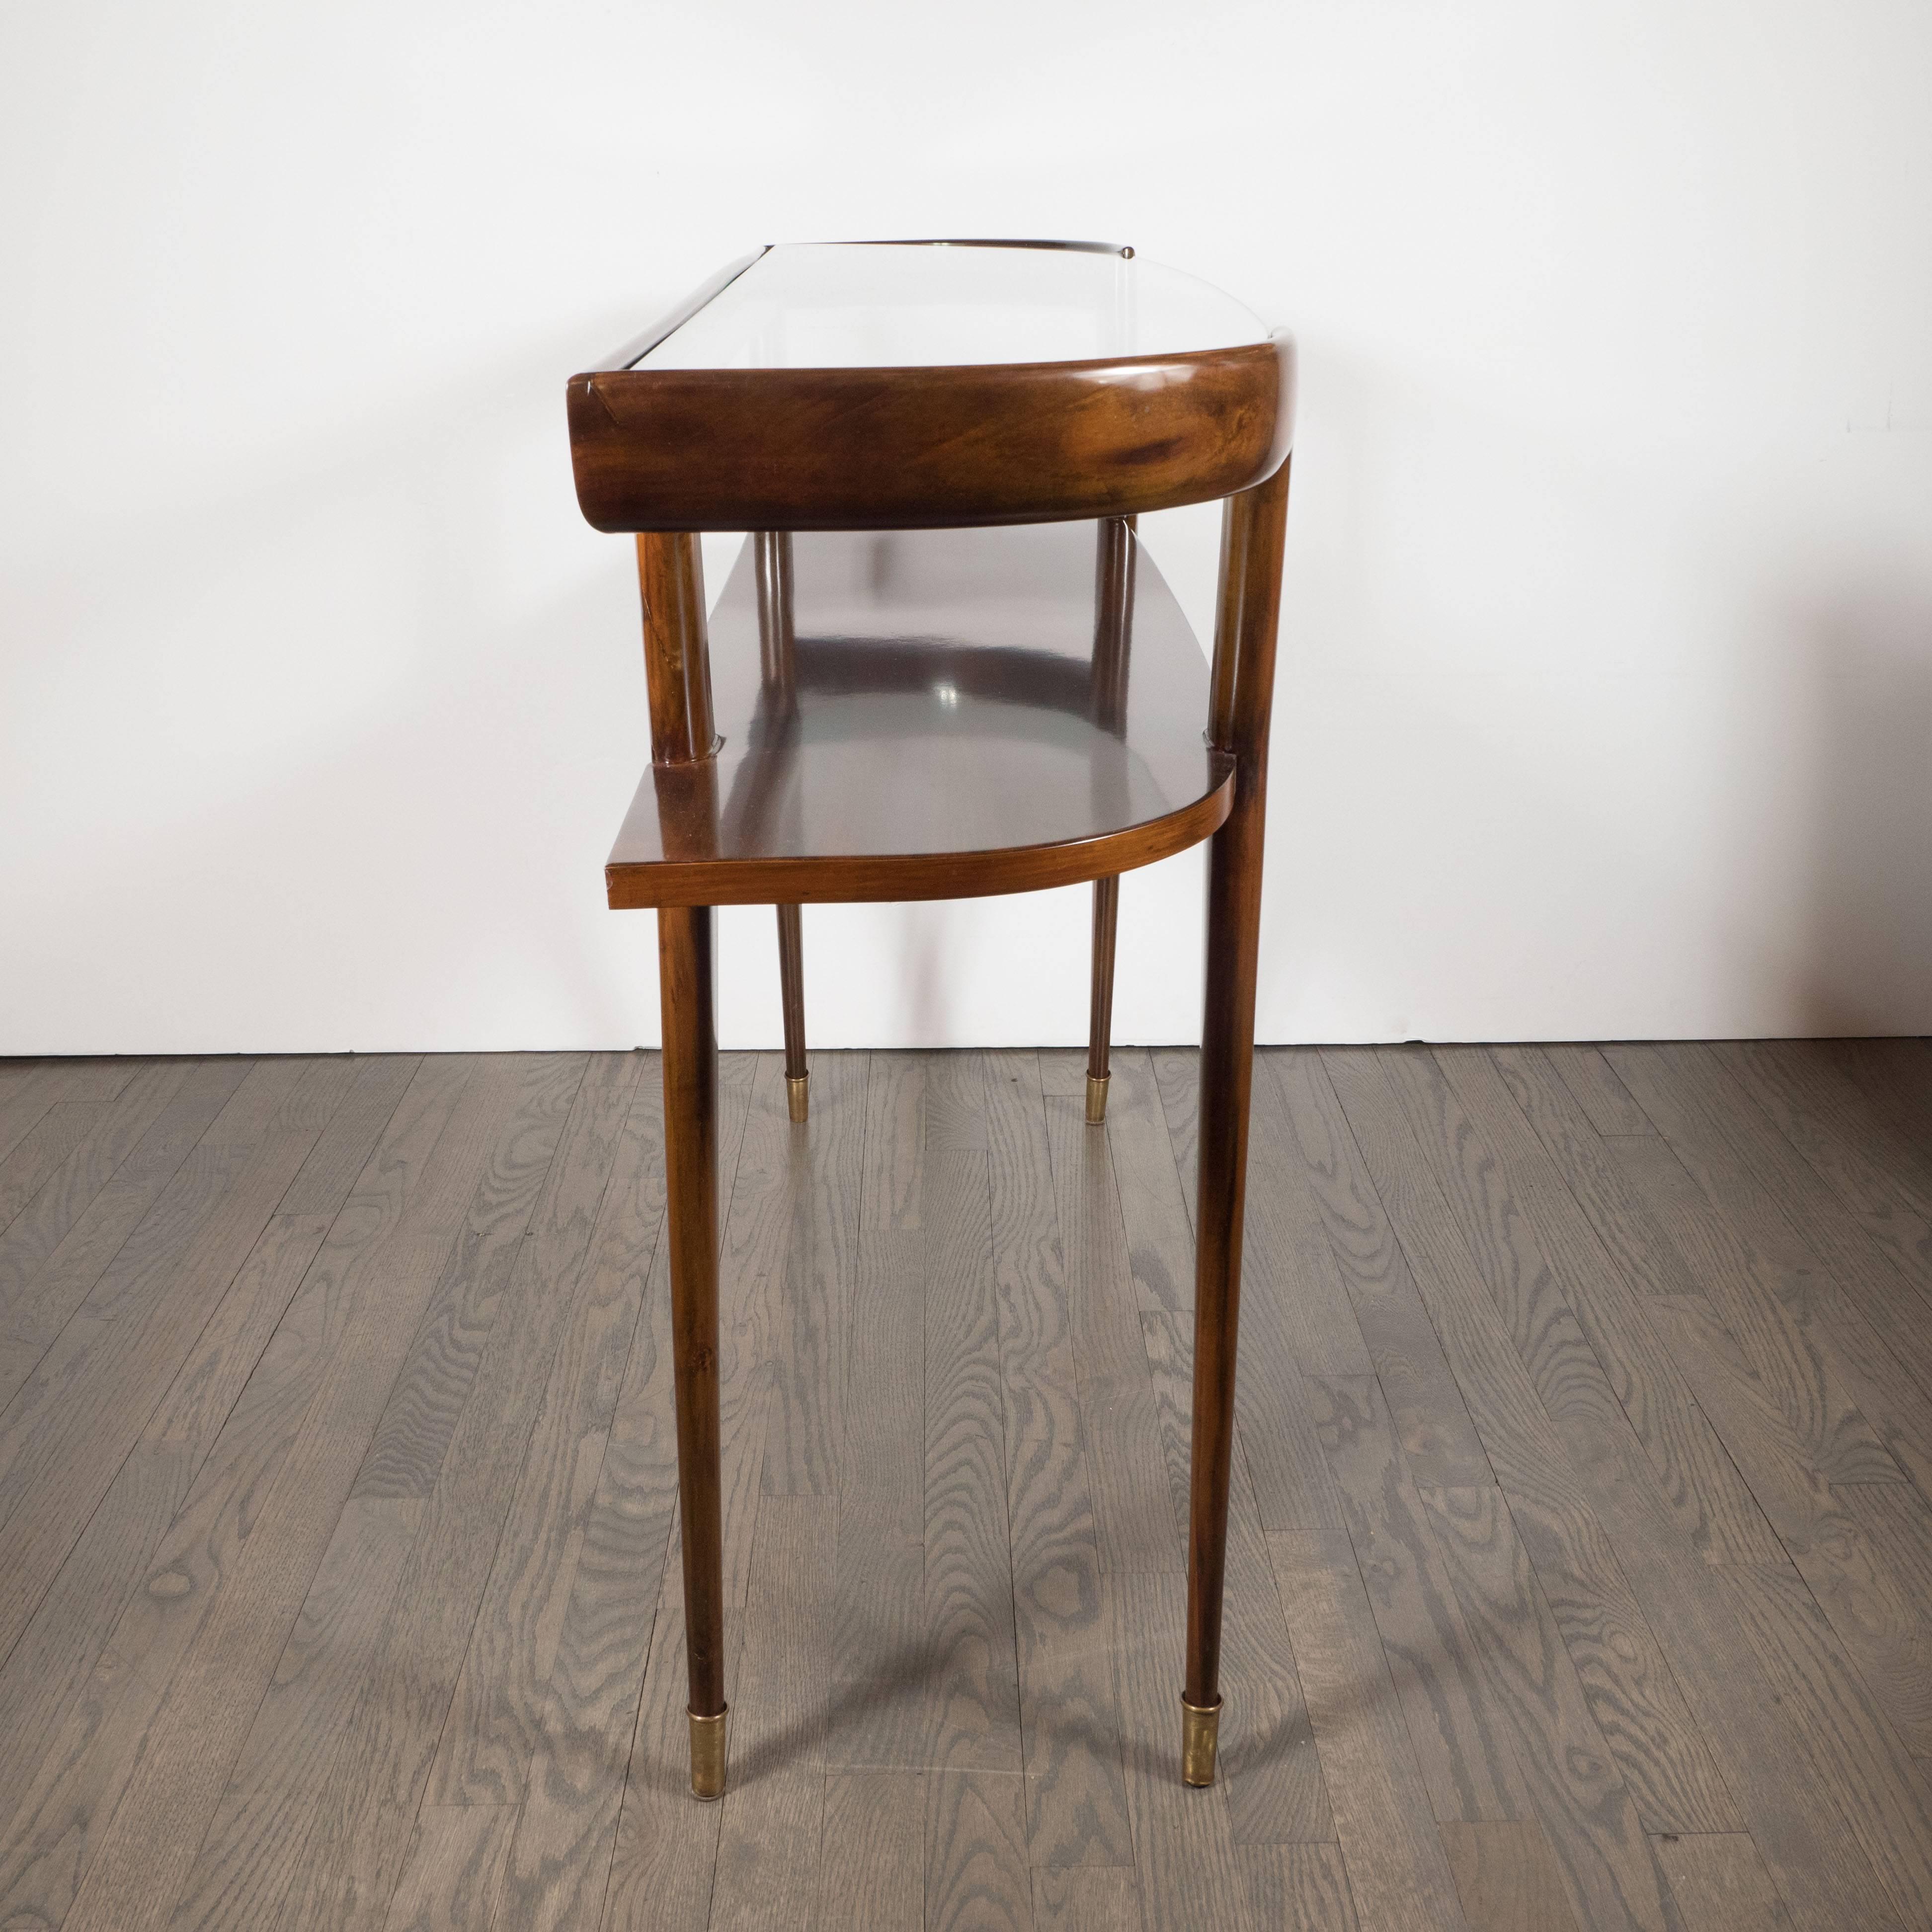 Sophisticated Mid-Century Modernist Console in Hand Rubbed Walnut and Glass 1